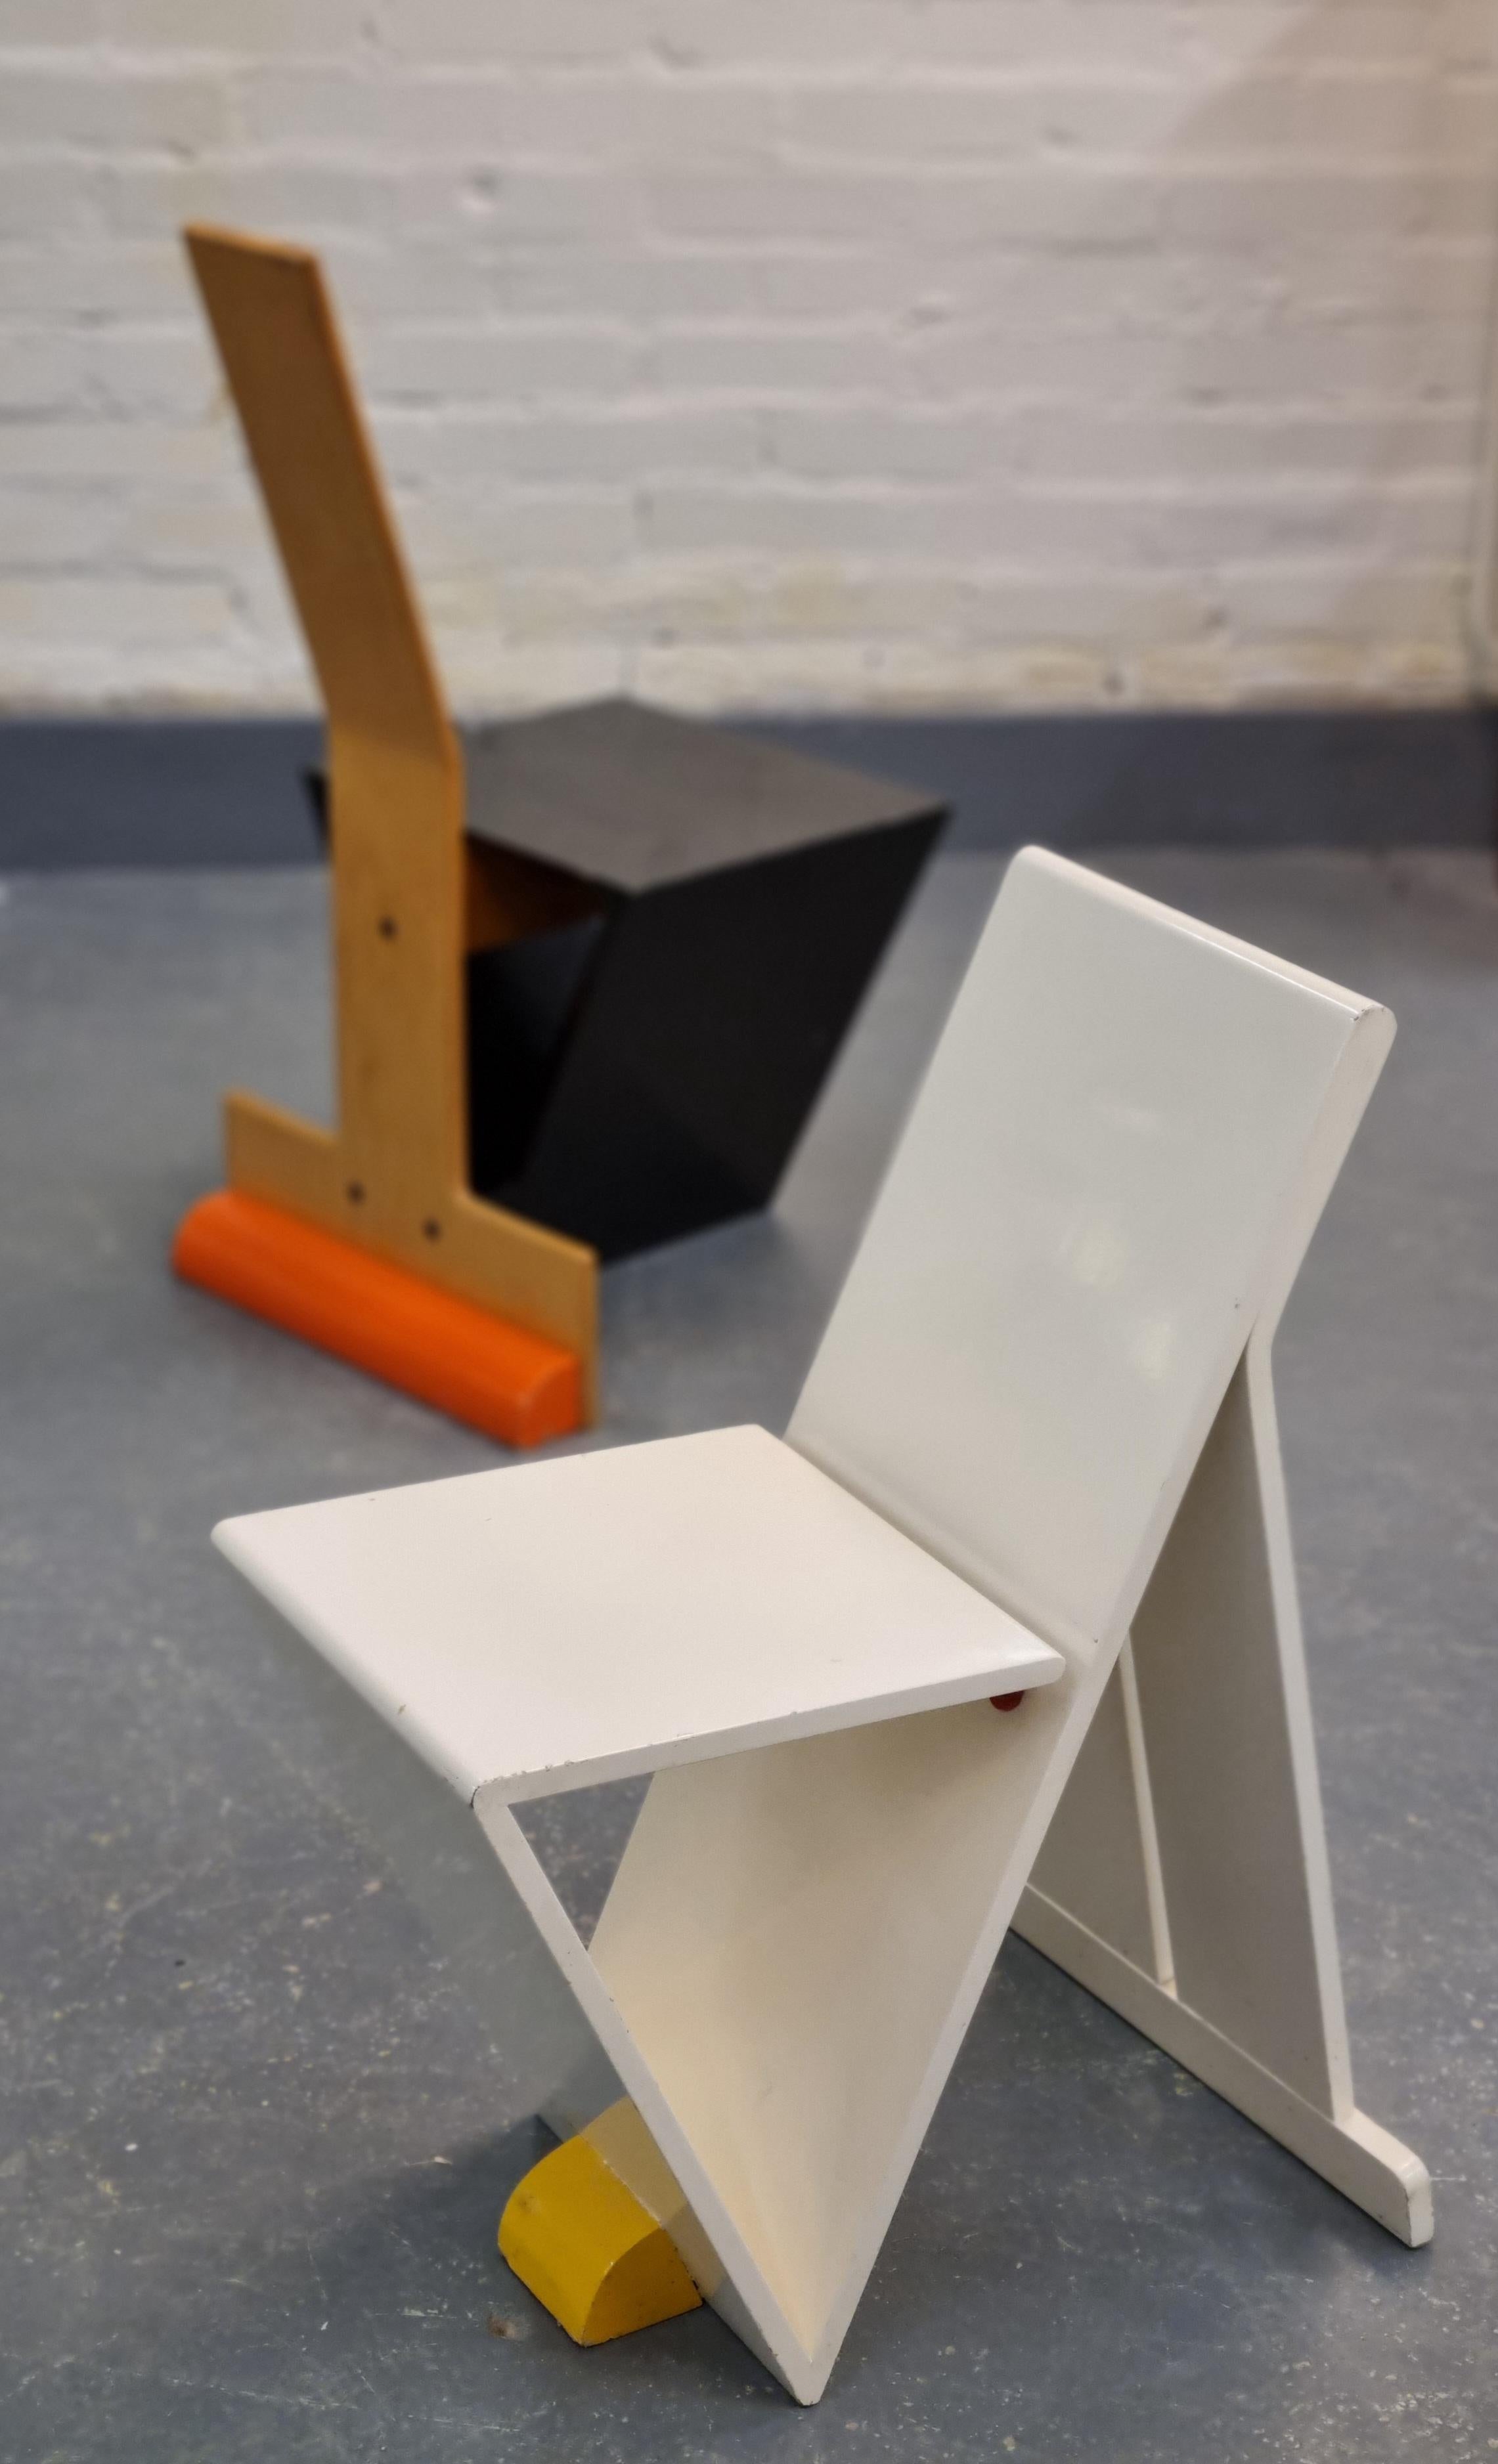 These unique neo funk chairs Gallo and Gallina or 